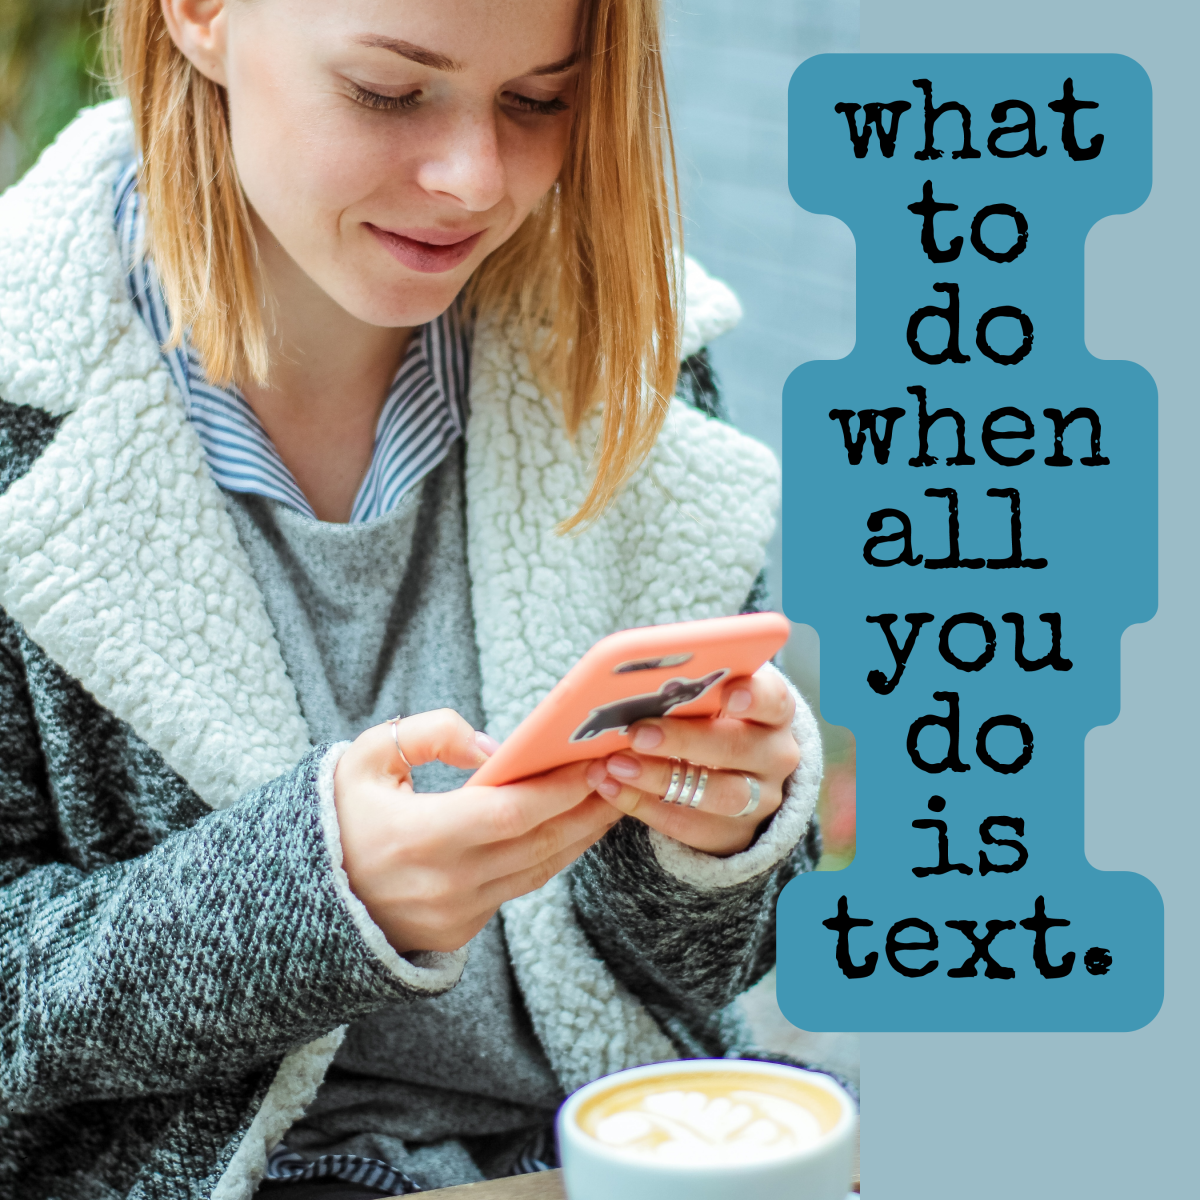 Are You in a Texting Relationship?